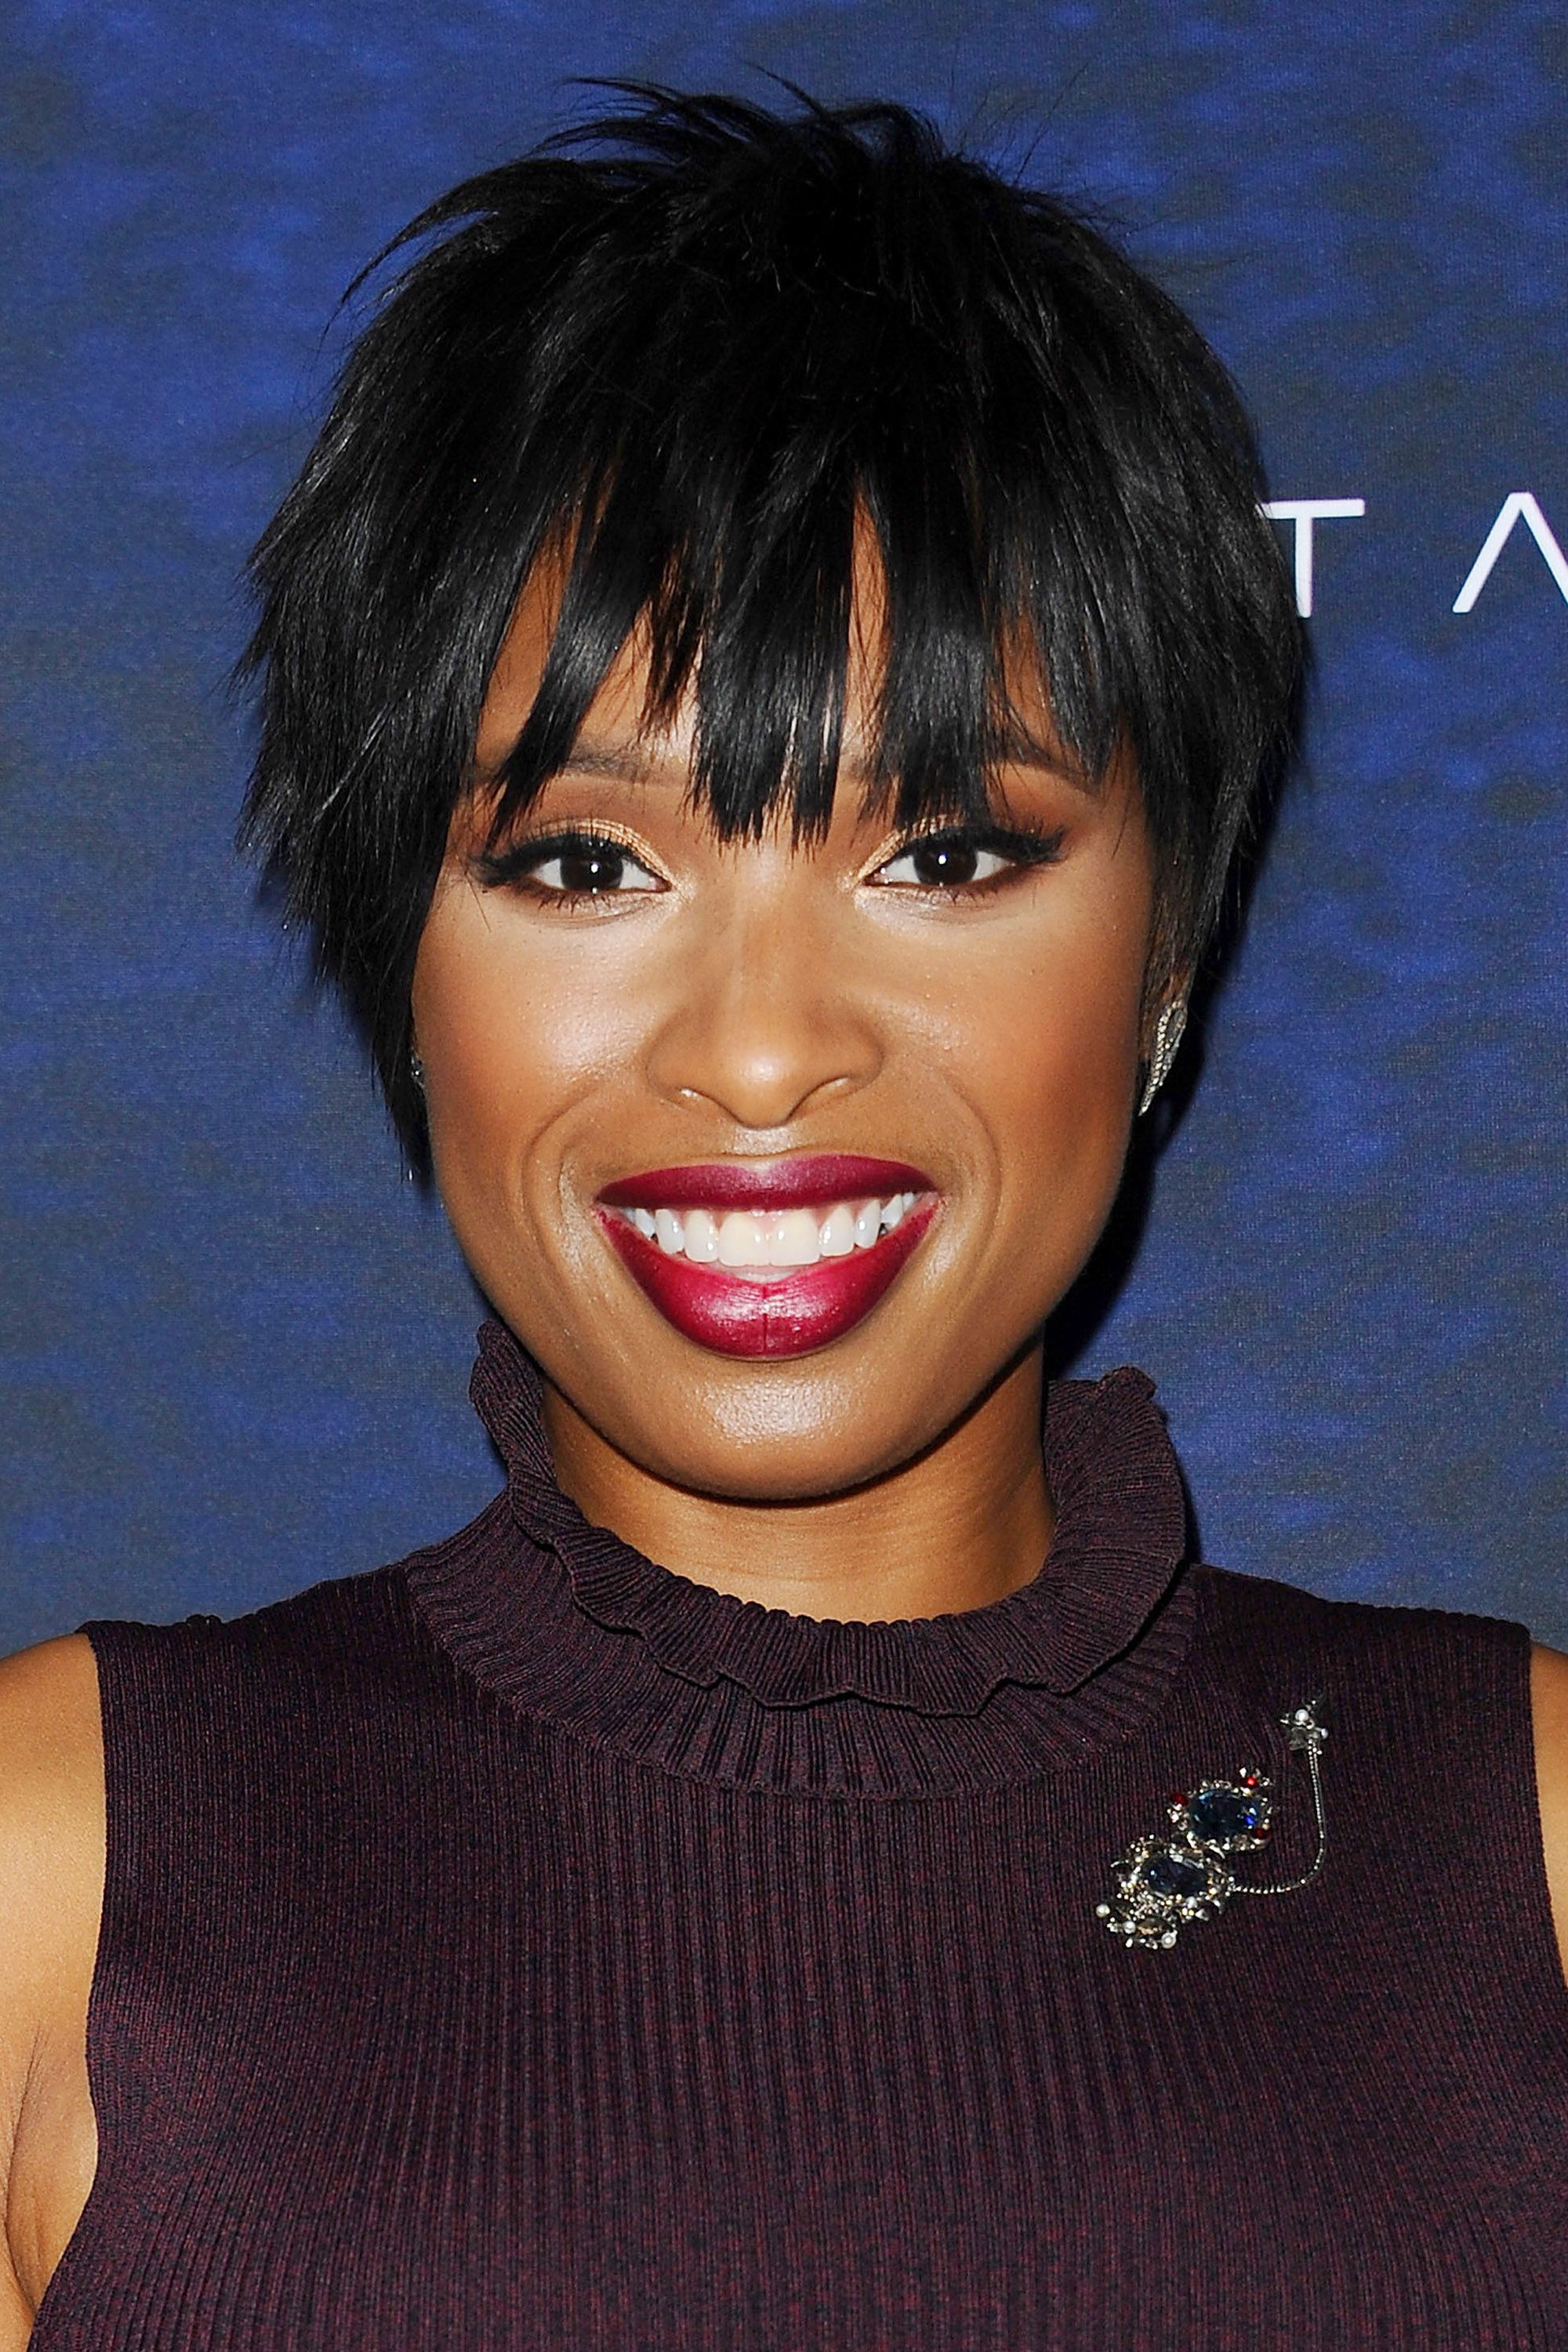 34 Layered Bob Hairstyles That Give All The Oomph | Glamour UK